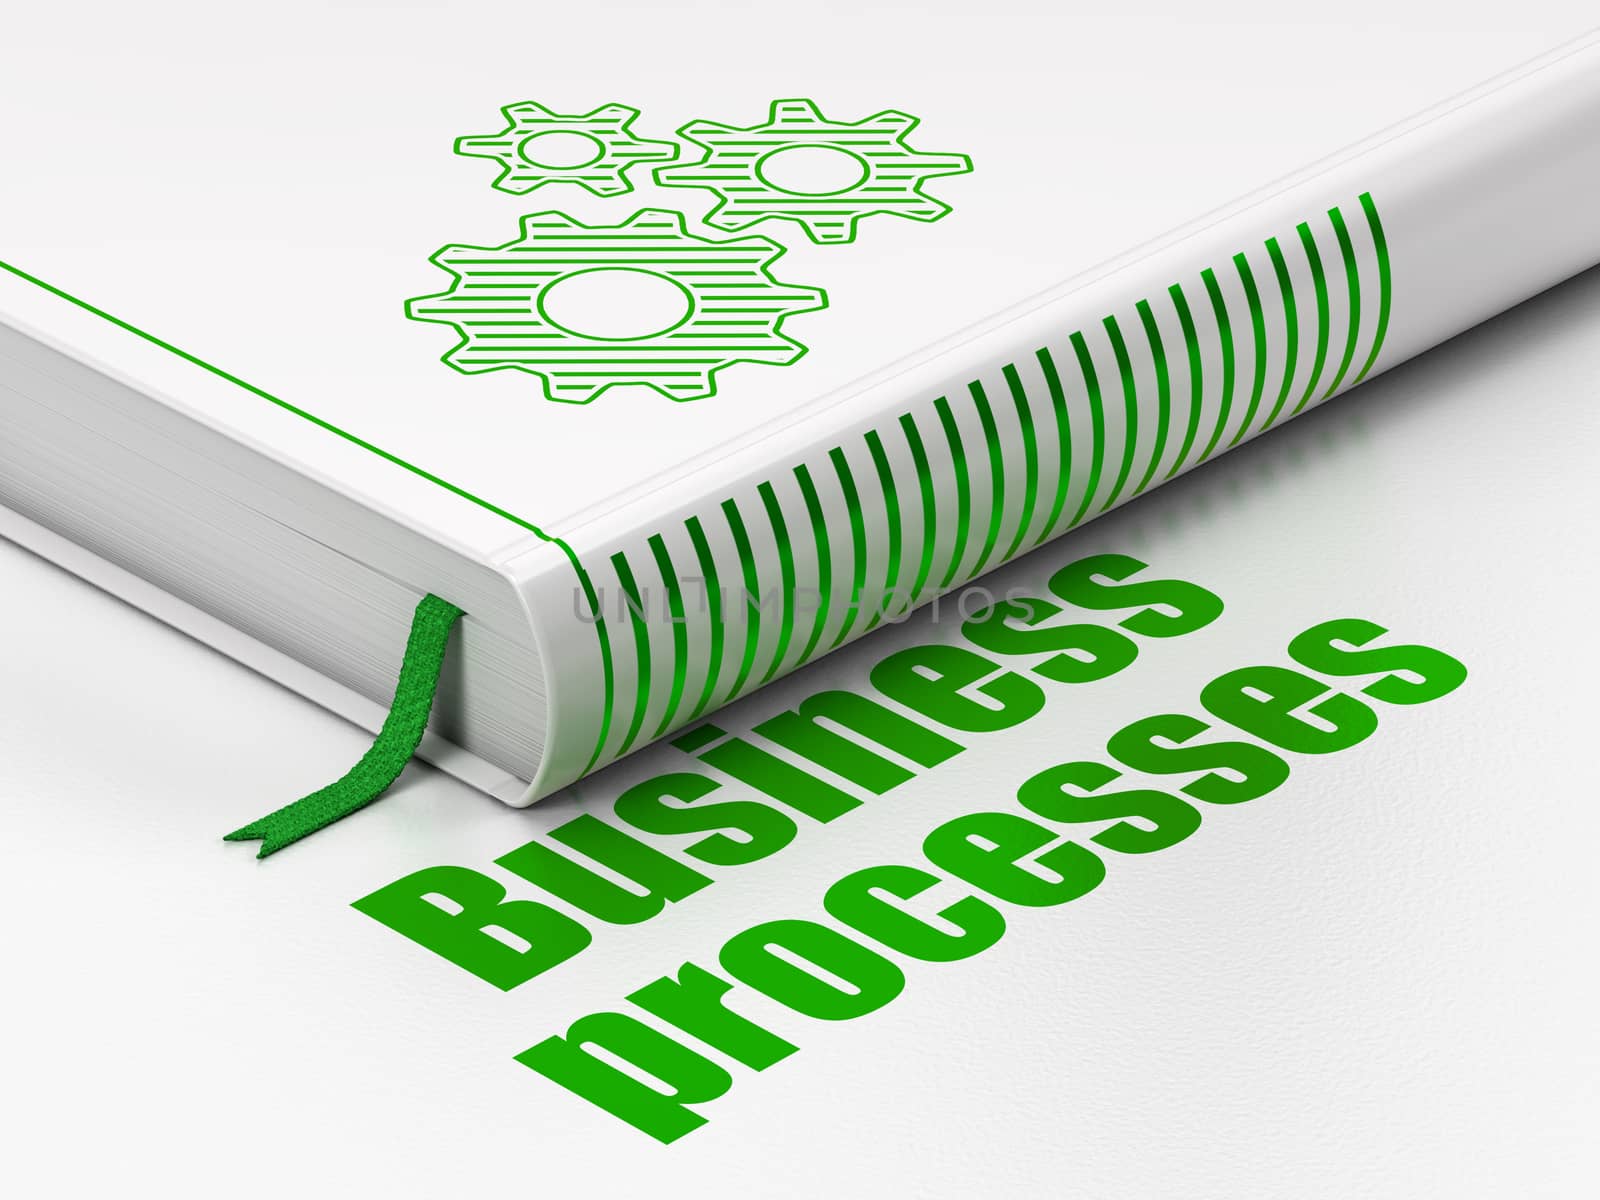 Finance concept: closed book with Green Gears icon and text Business Processes on floor, white background, 3D rendering